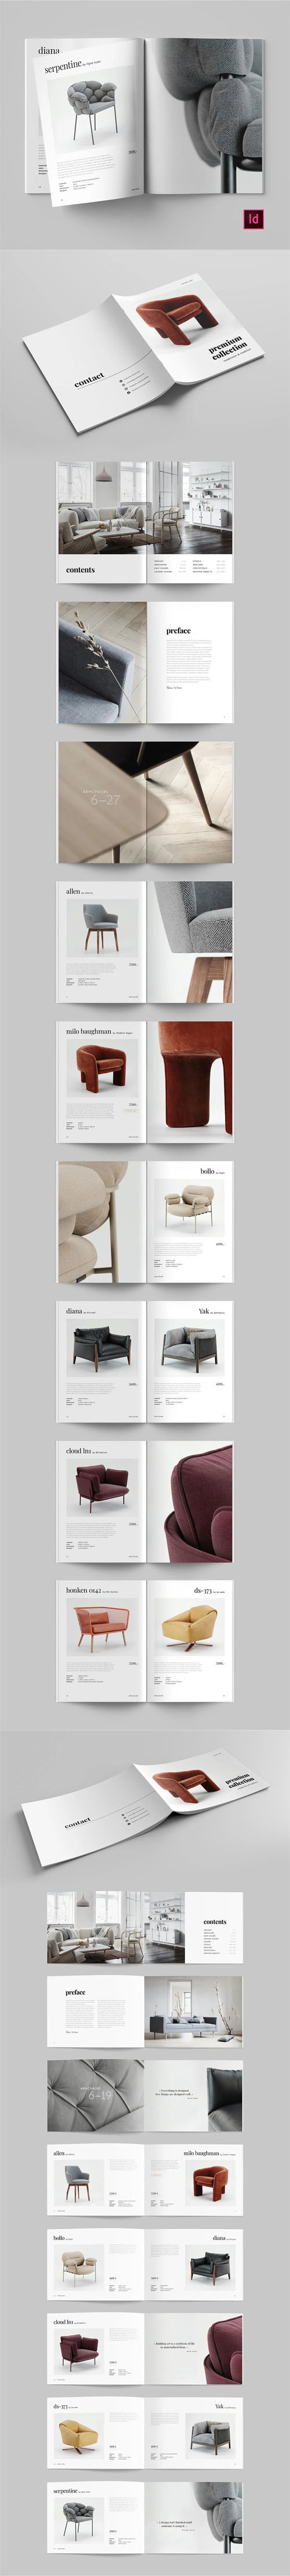 Product Brochure Indesign INDD Template [A4/US Letter]